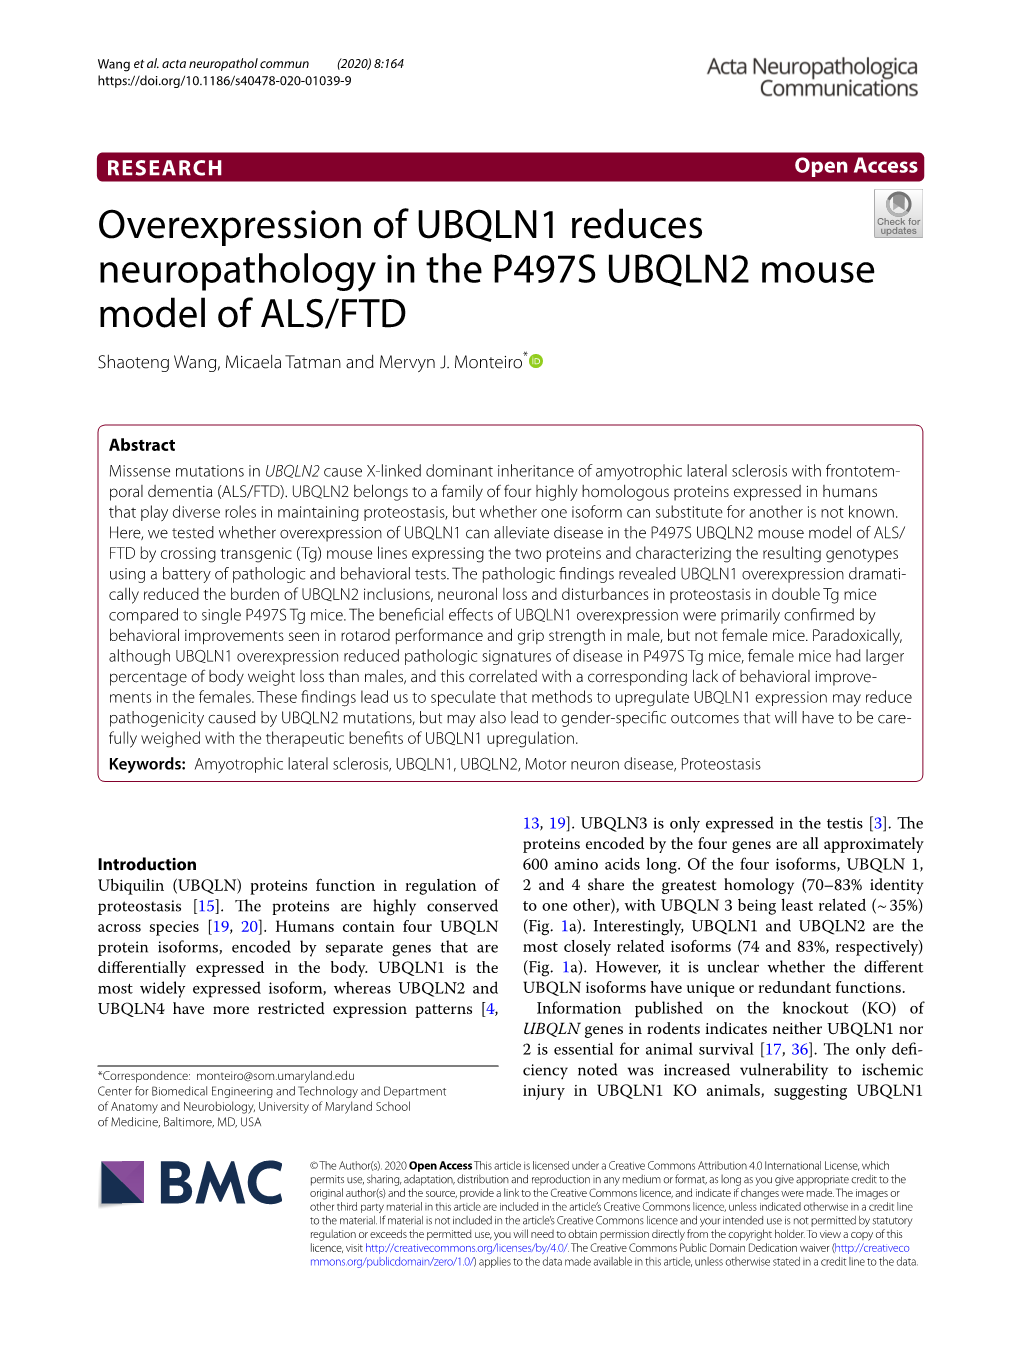 Overexpression of UBQLN1 Reduces Neuropathology in the P497S UBQLN2 Mouse Model of ALS/FTD Shaoteng Wang, Micaela Tatman and Mervyn J